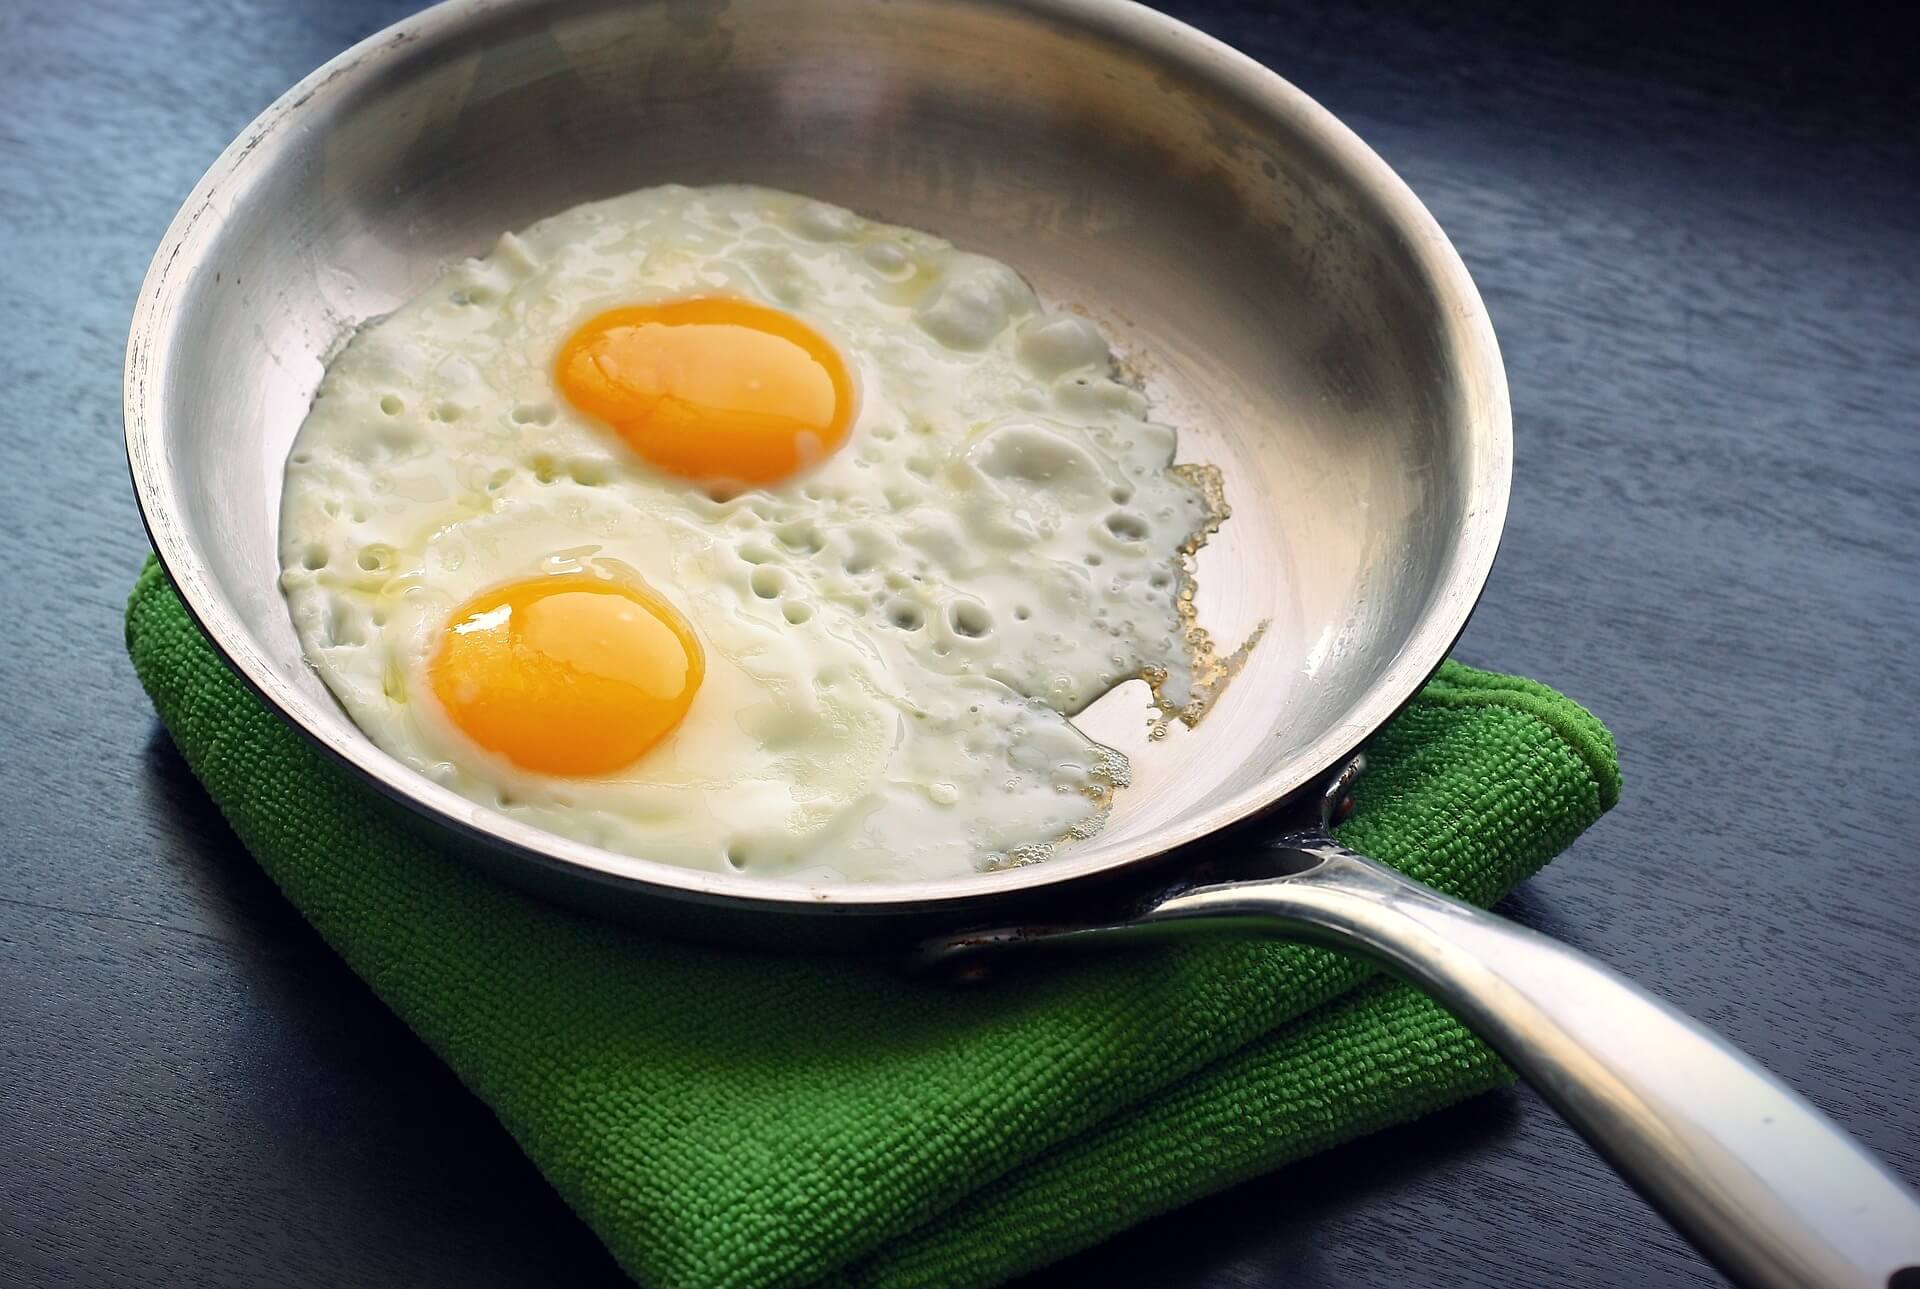 How To Cook Eggs In Stainless Steel Cookware - Food Above Gold